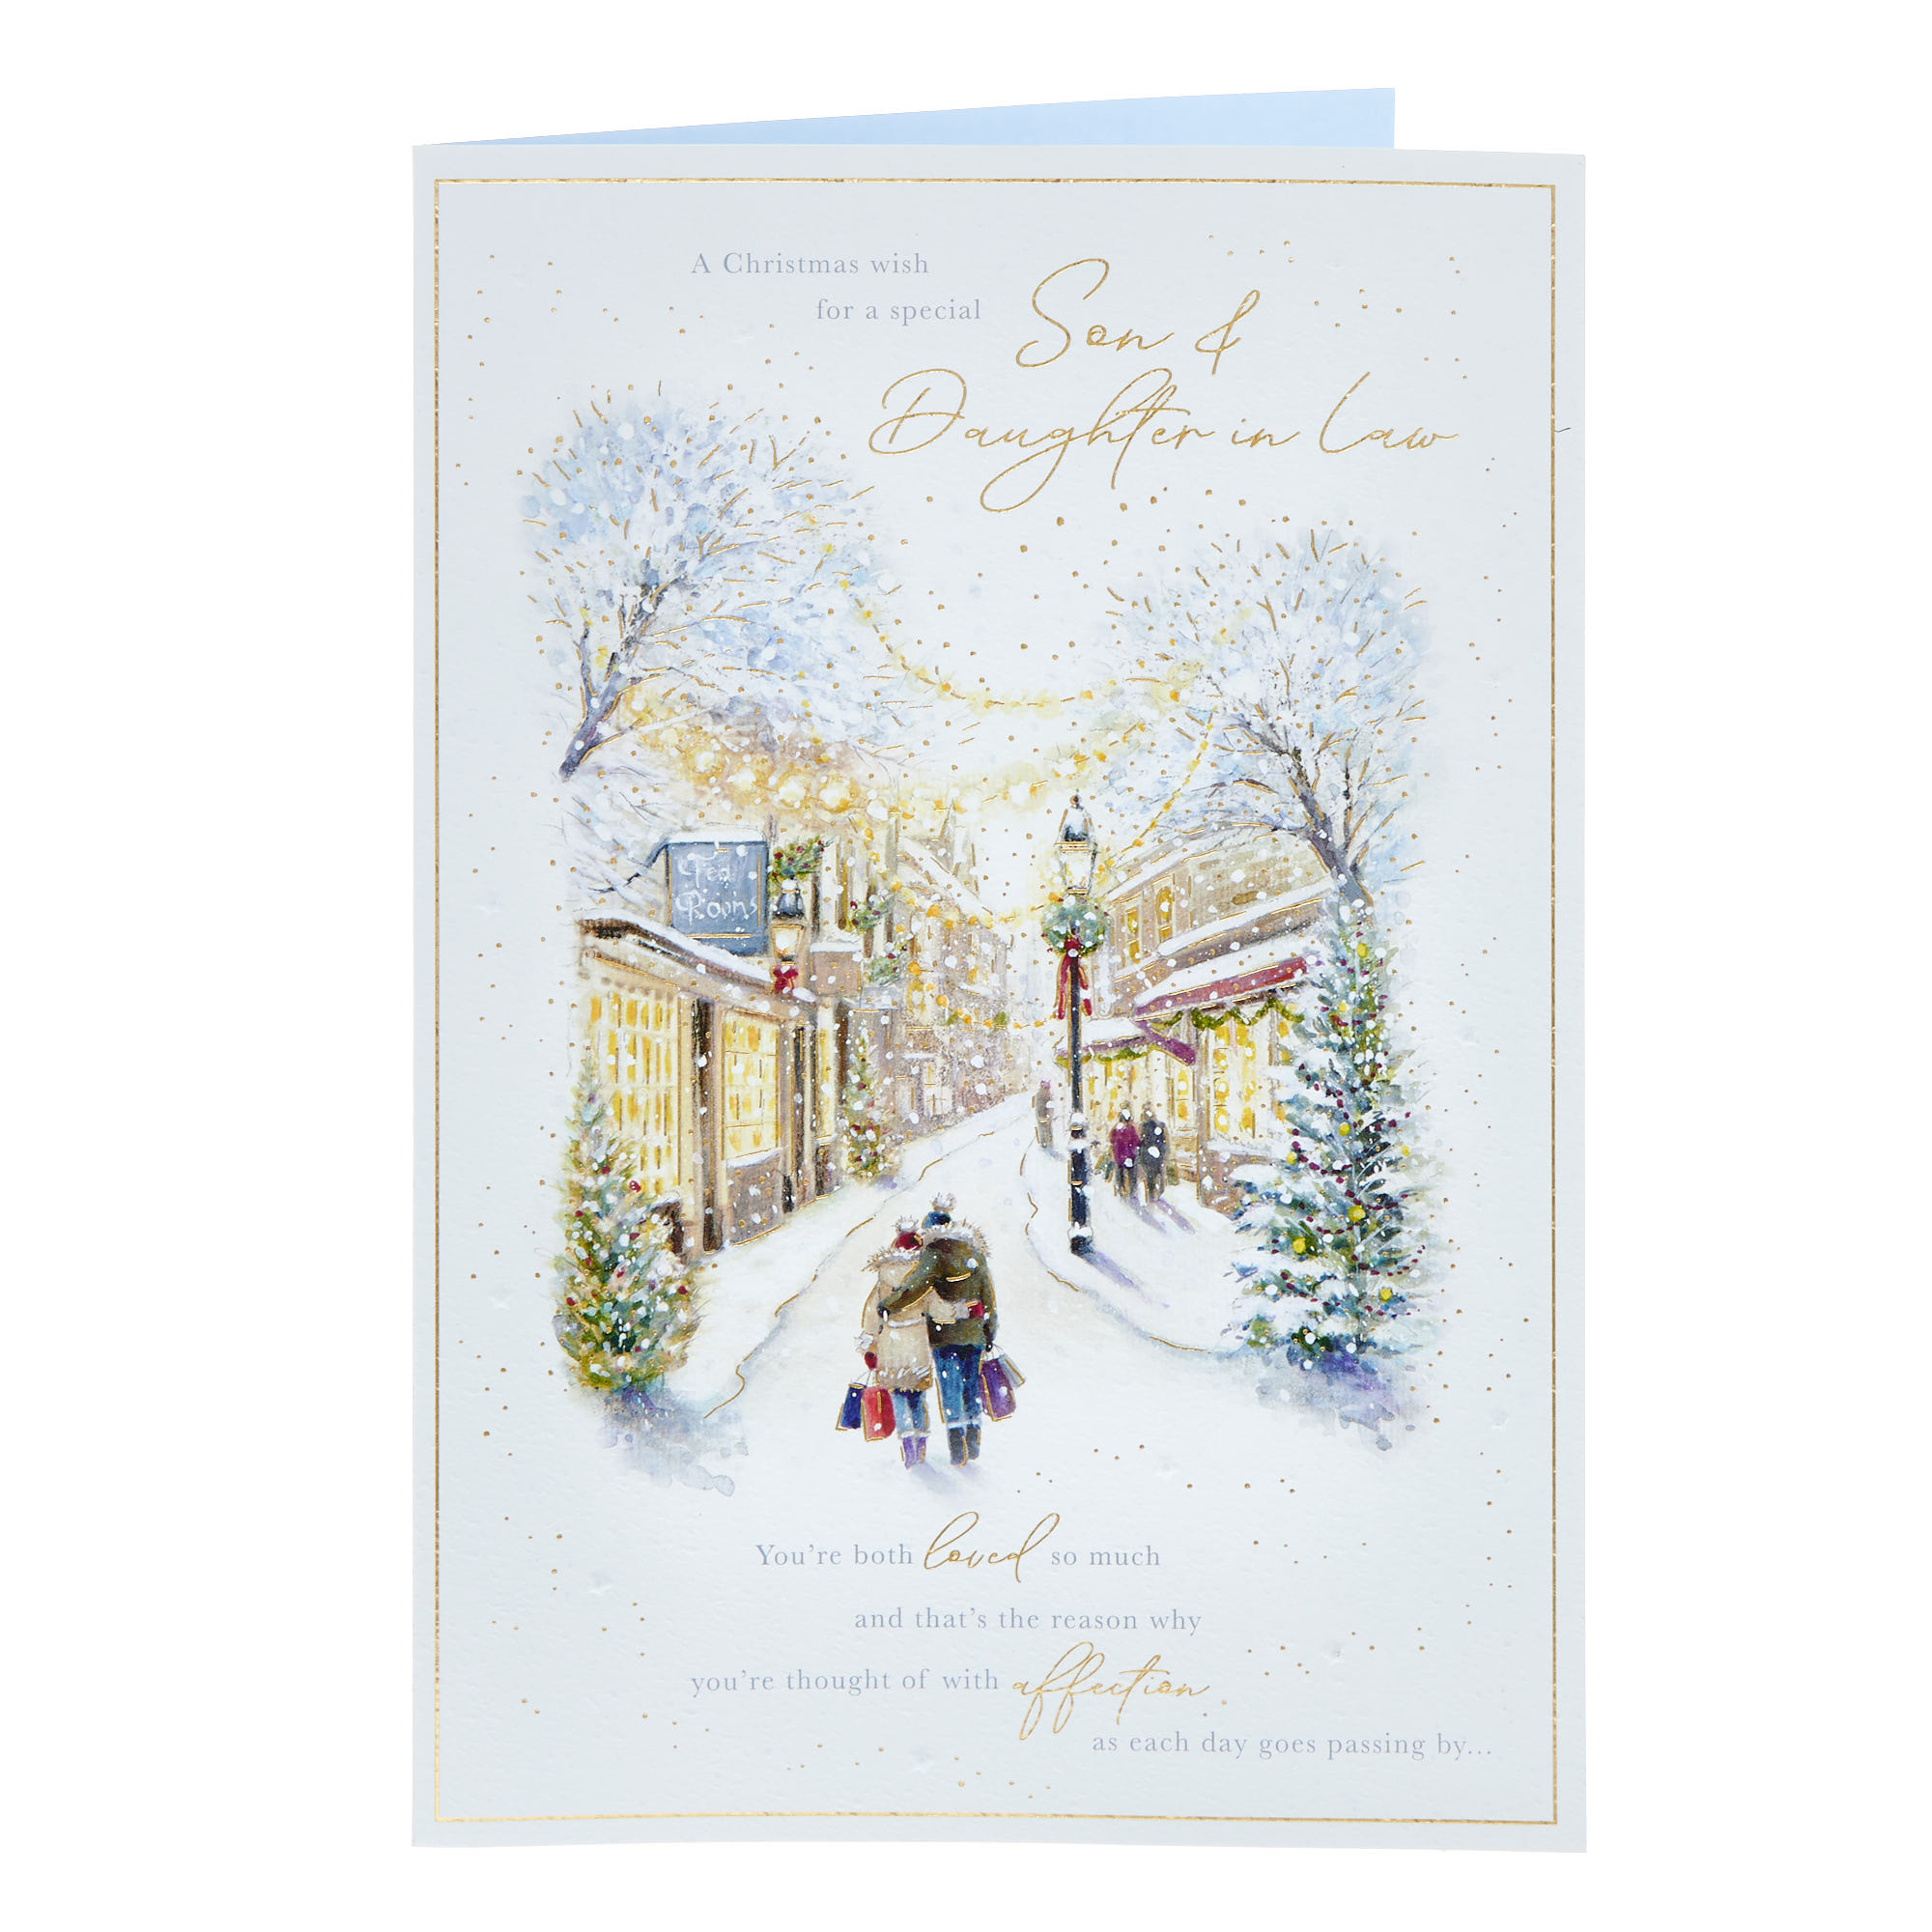 Son & Daughter In Law Winter Scene Christmas Card